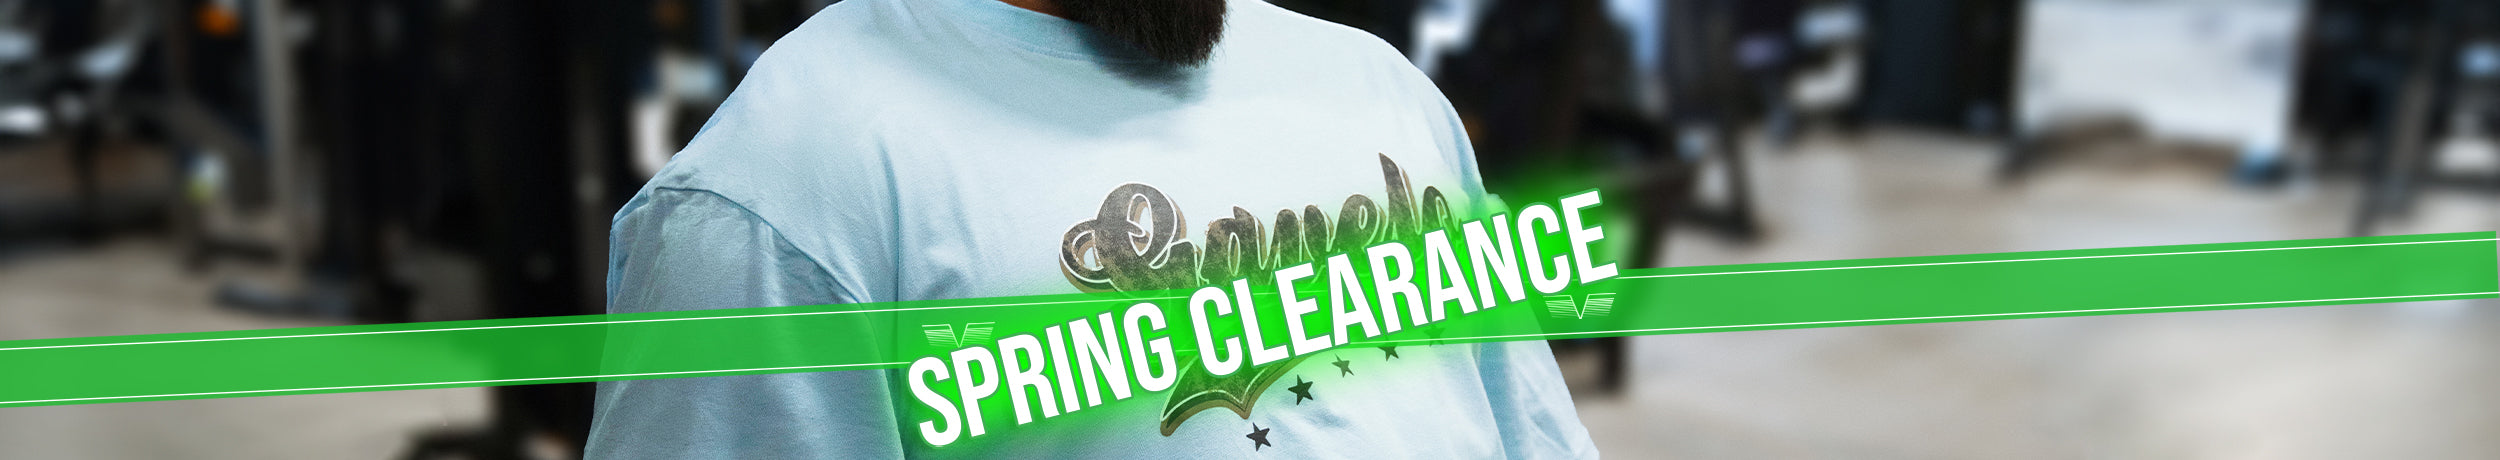 SPRING CLEARANCE HERR